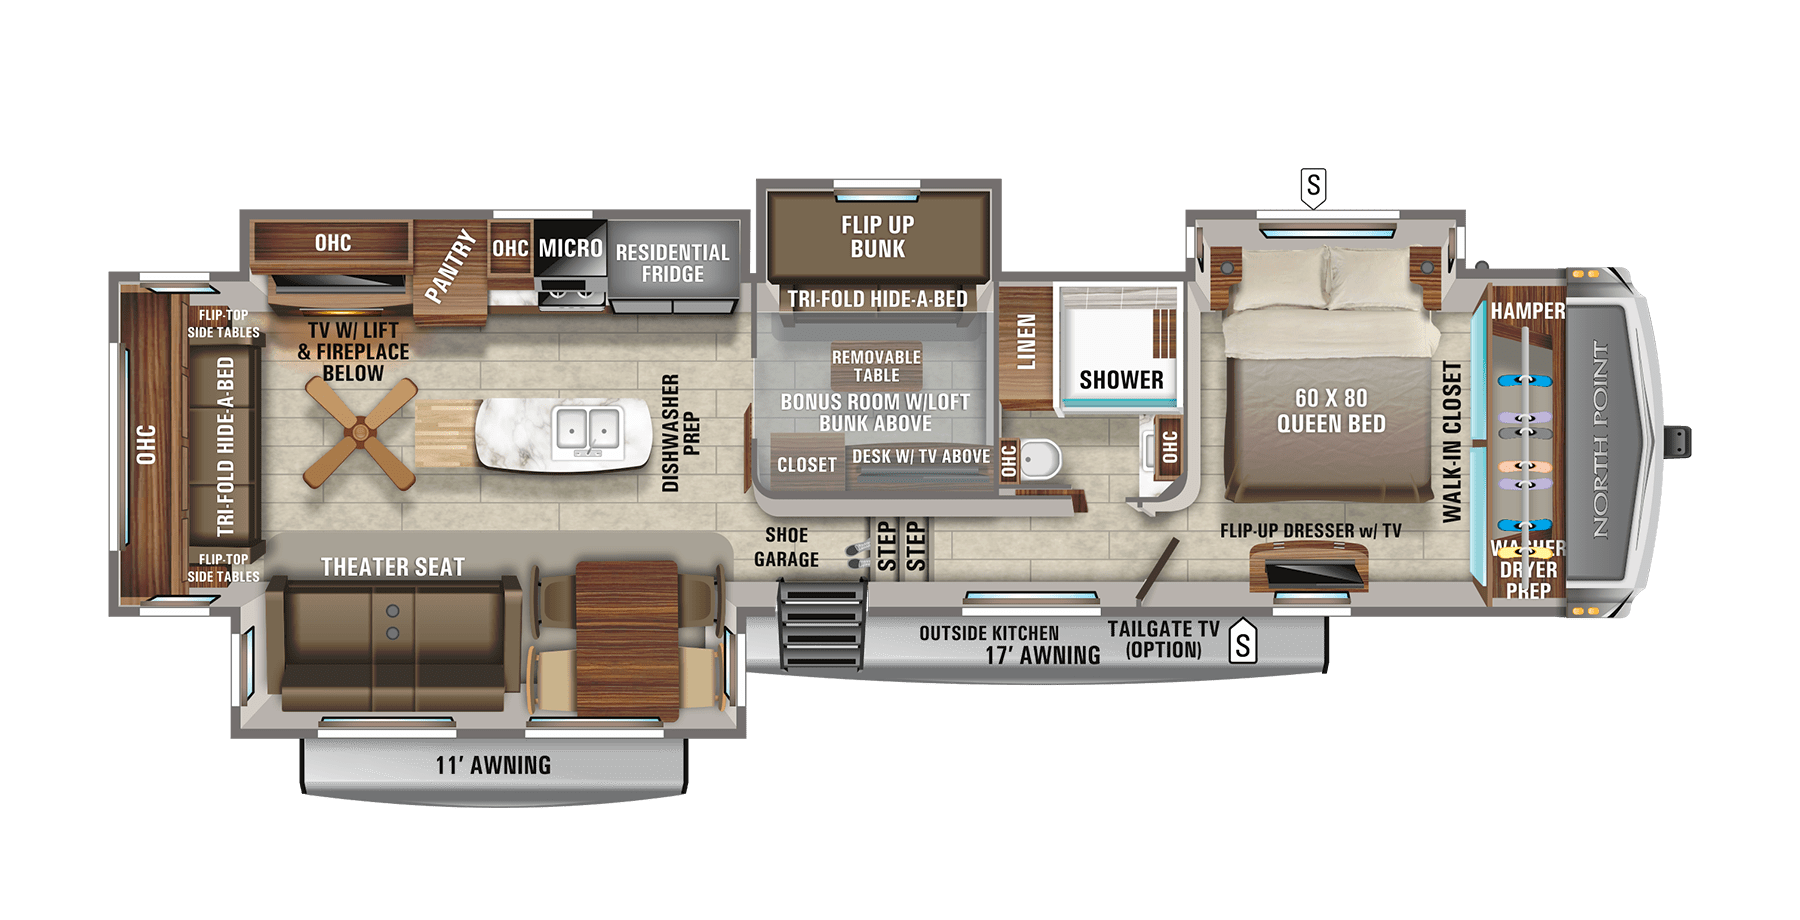 Fifth Wheel Rvs With Bunkhouses, 5th Wheel With Bunk Beds